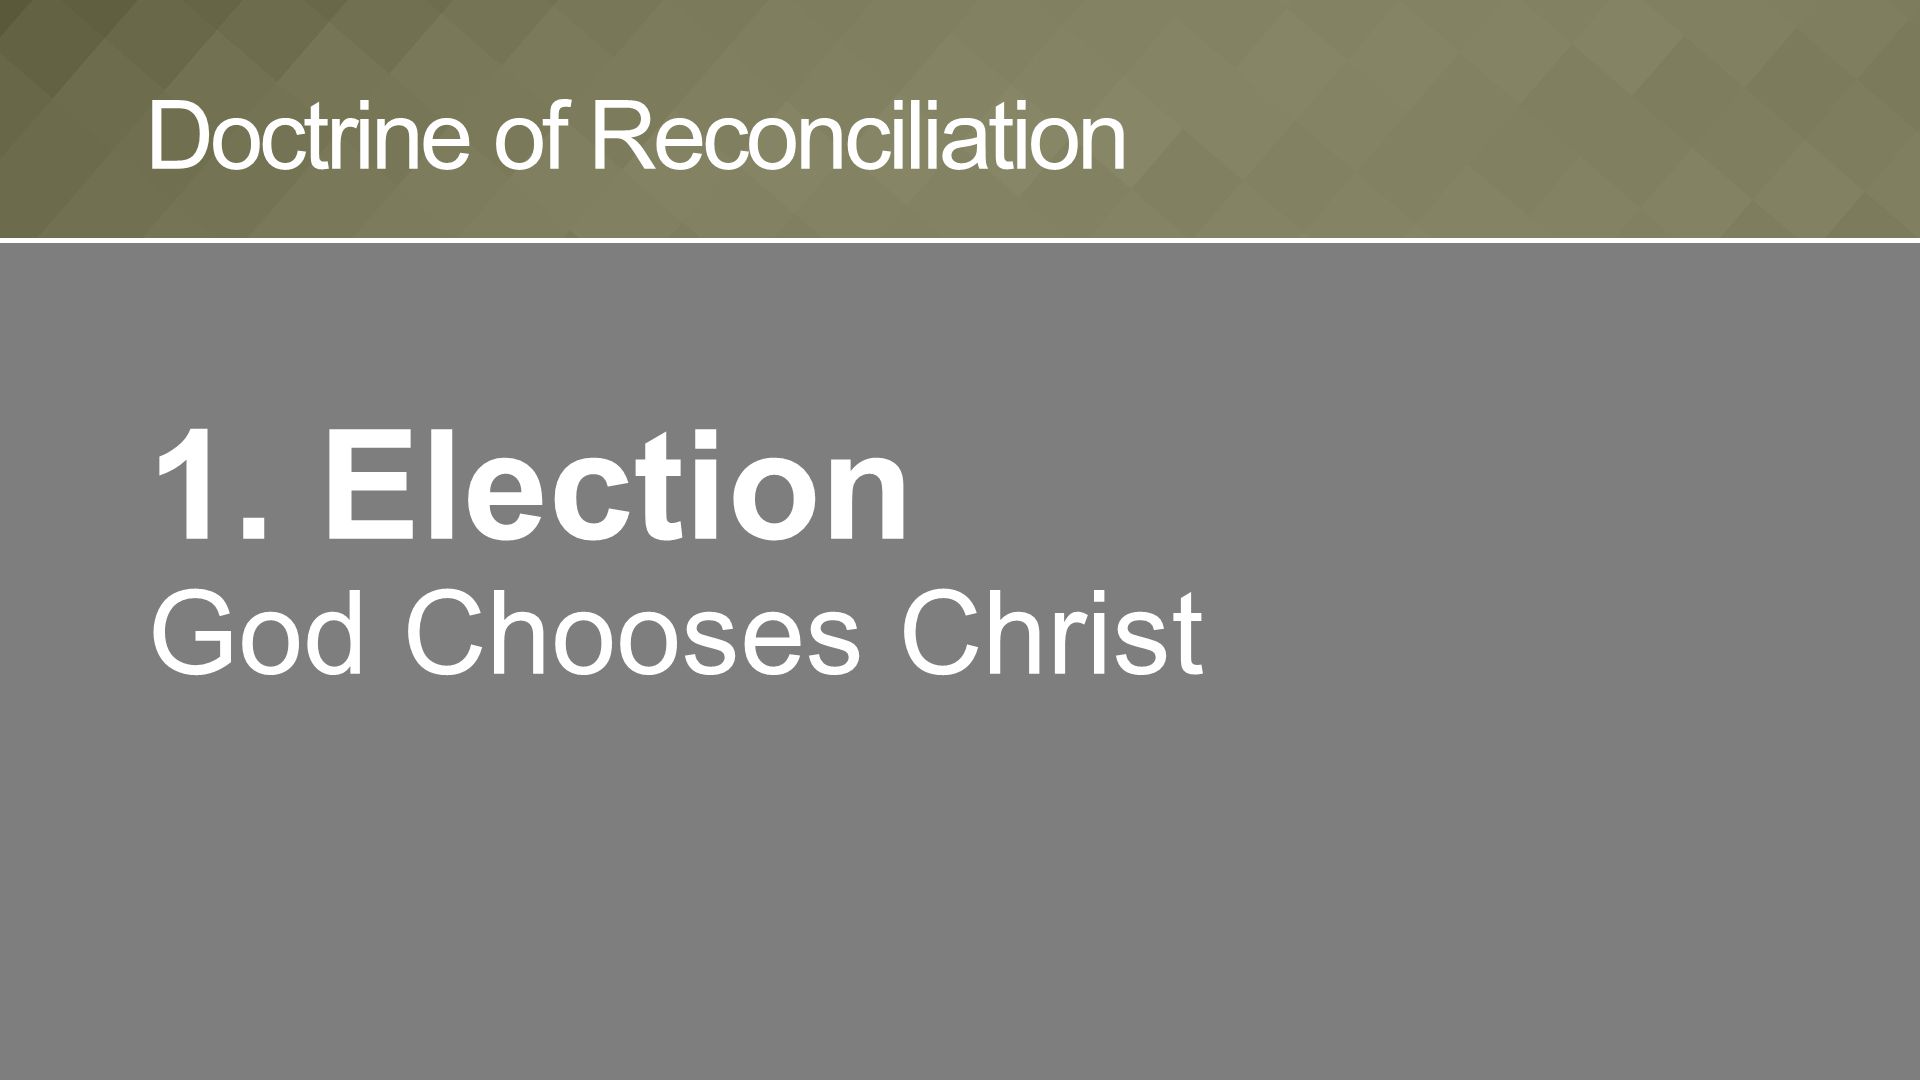 1. Election God Chooses Christ Doctrine of Reconciliation